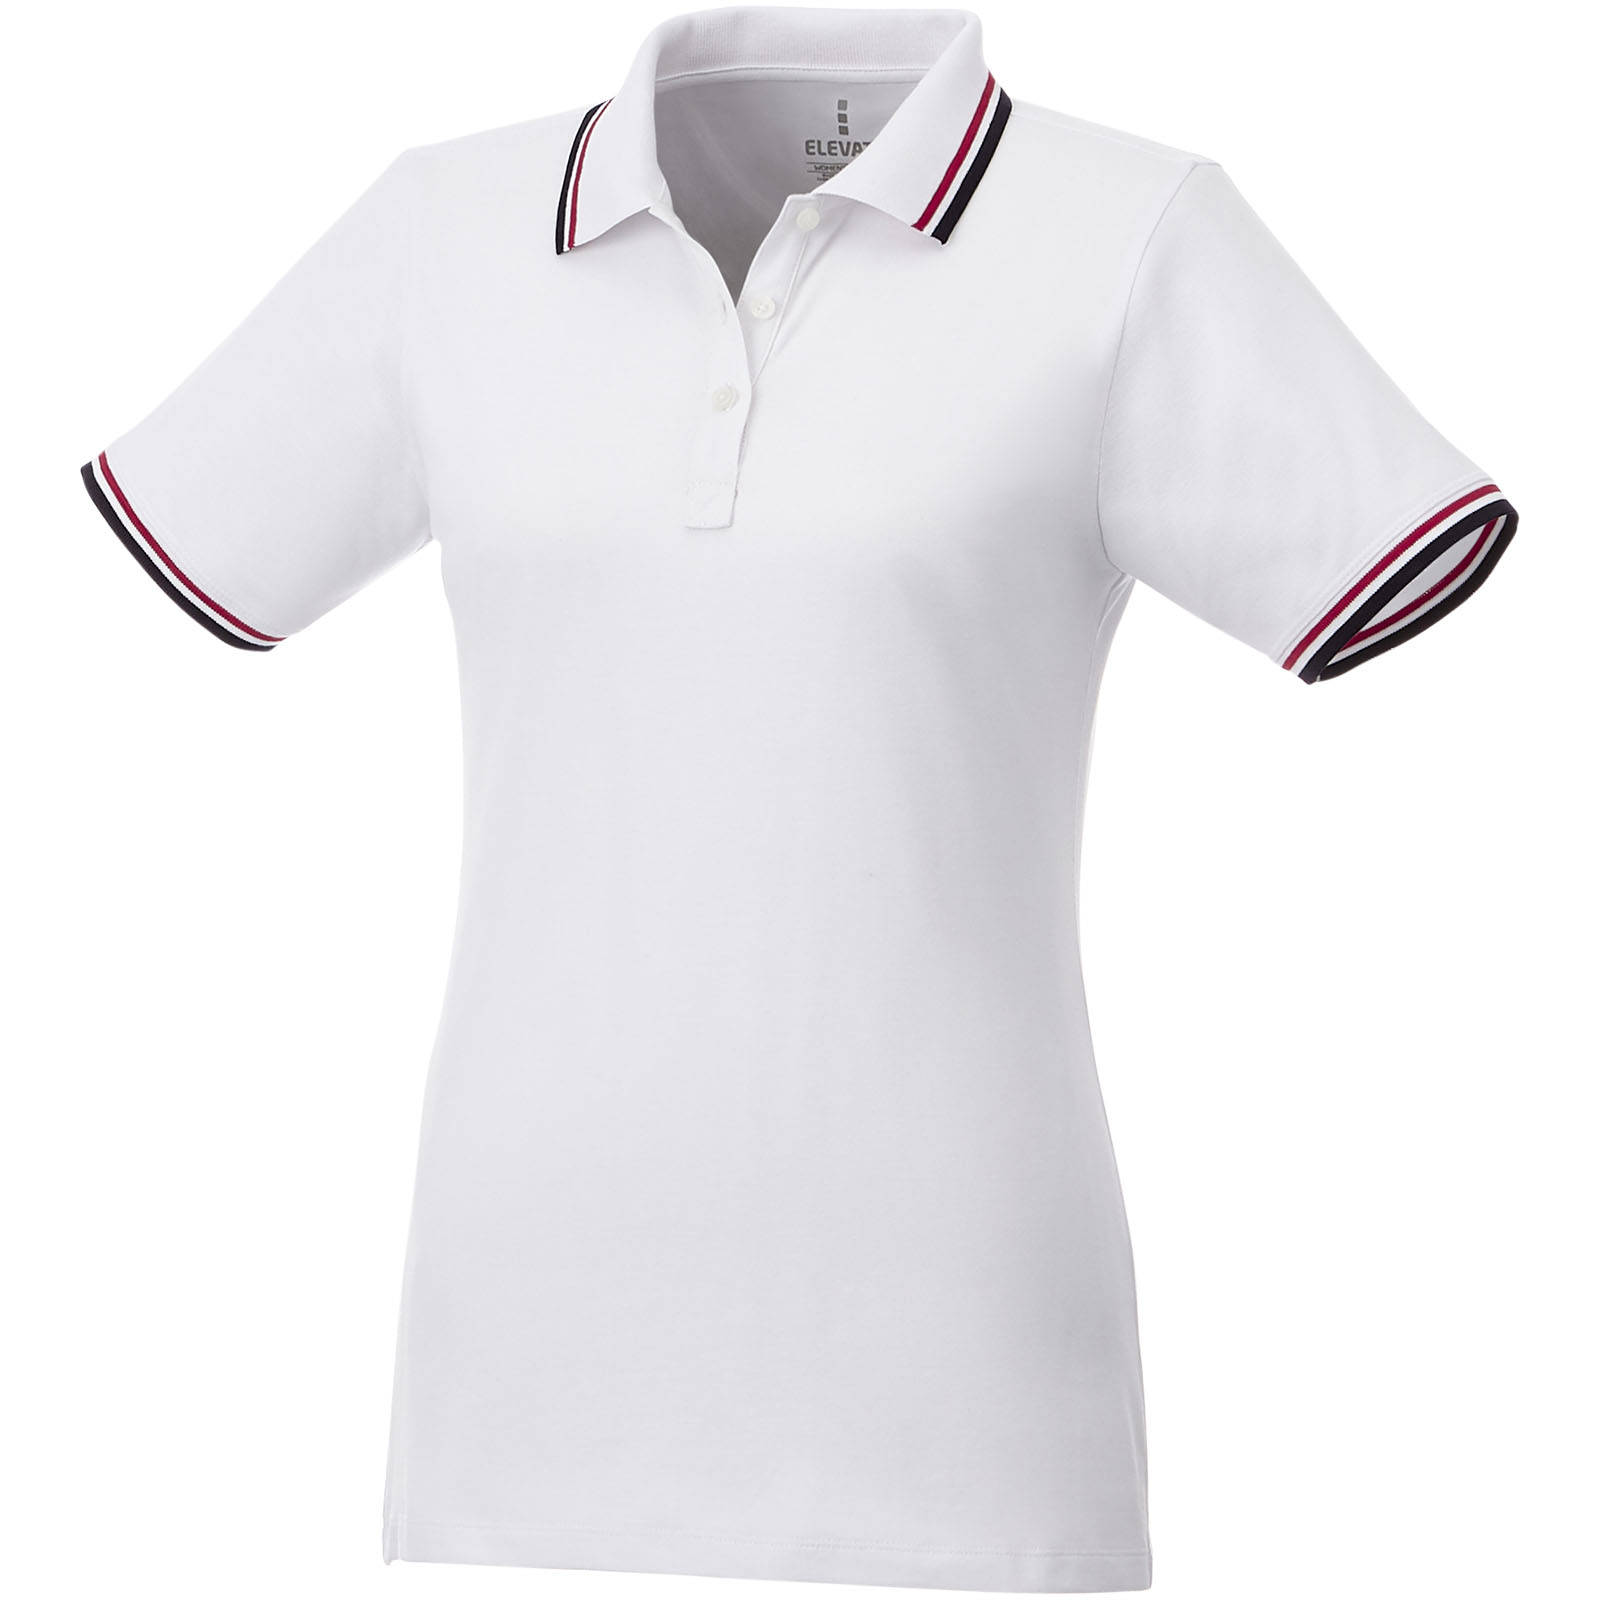 Polo shirt with contrasting tips - Braemar